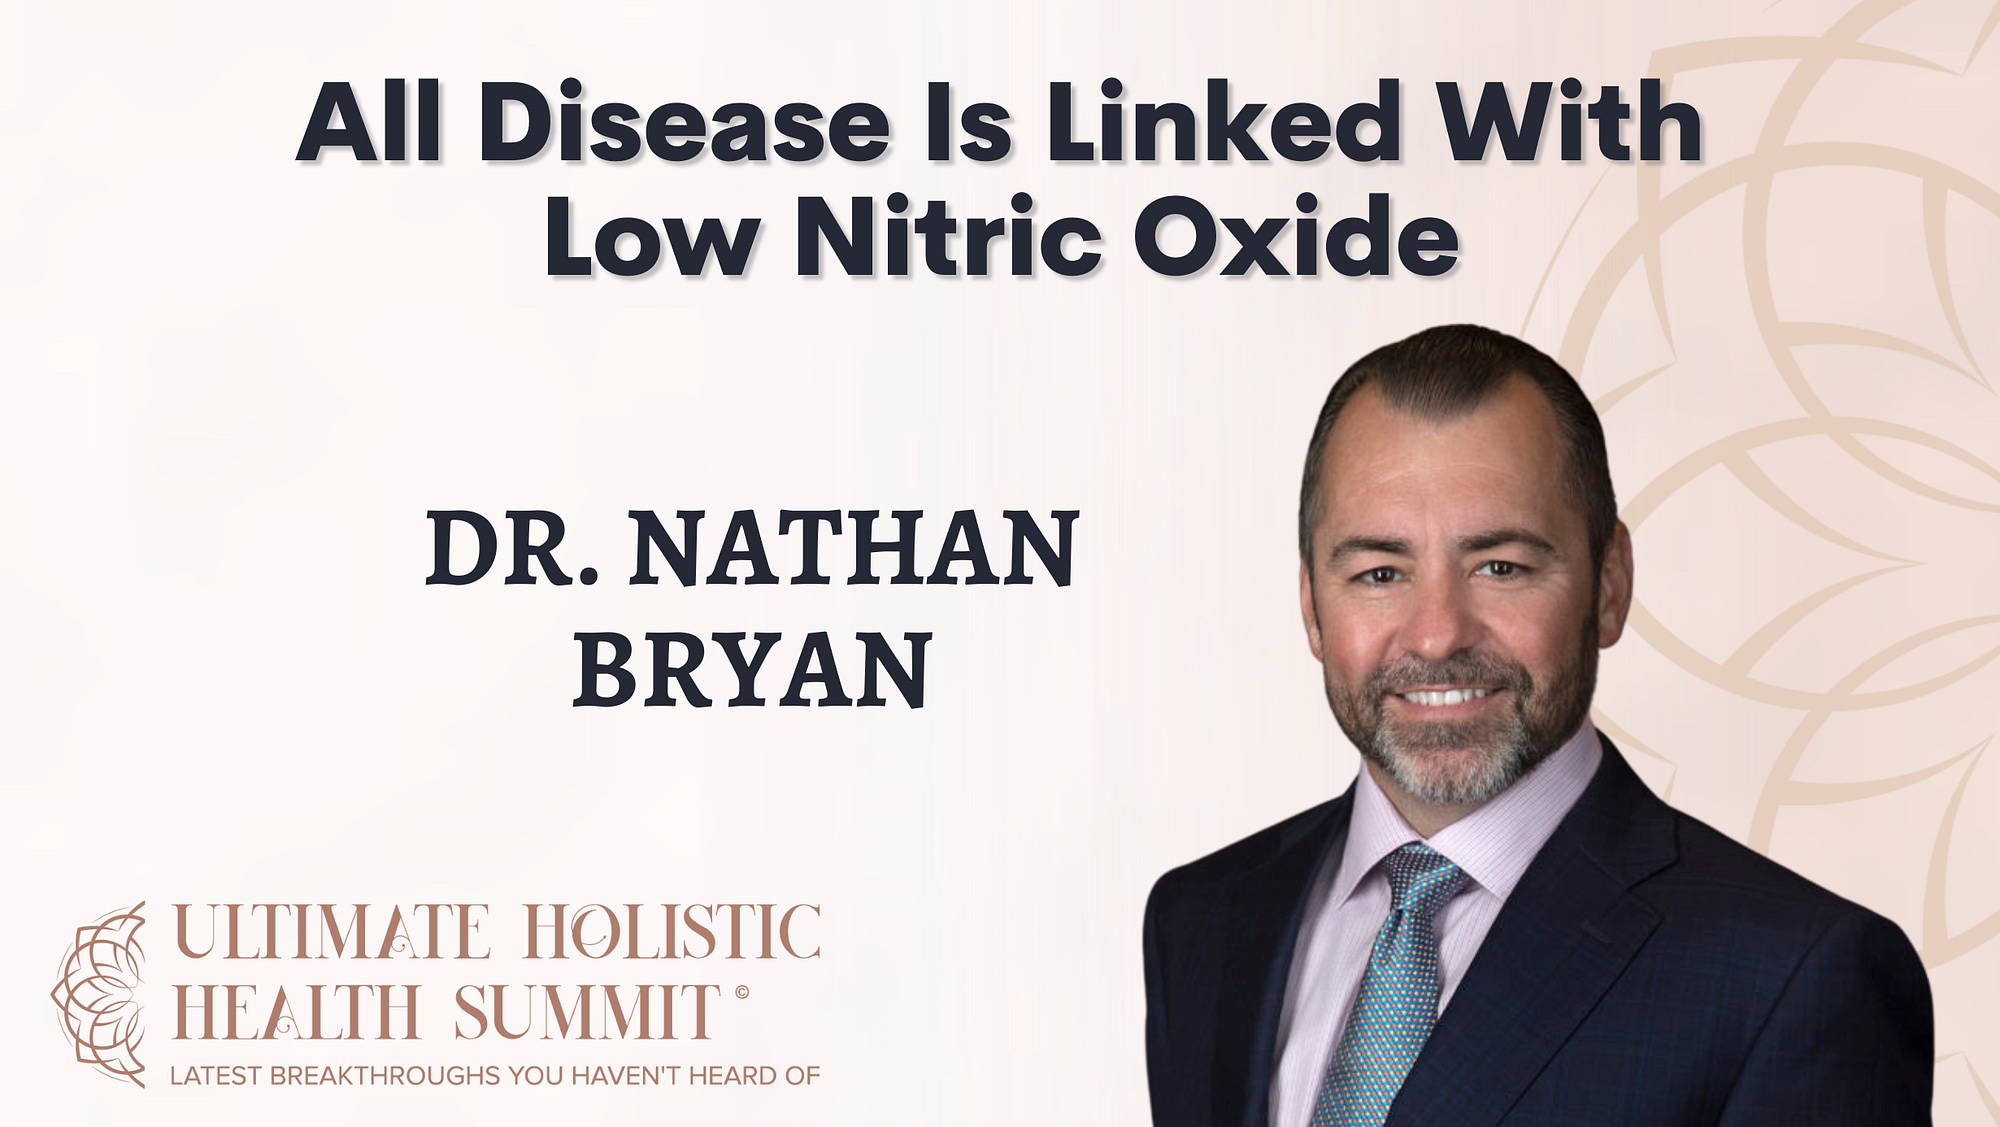 All Disease Is Linked With Low Nitric Oxide